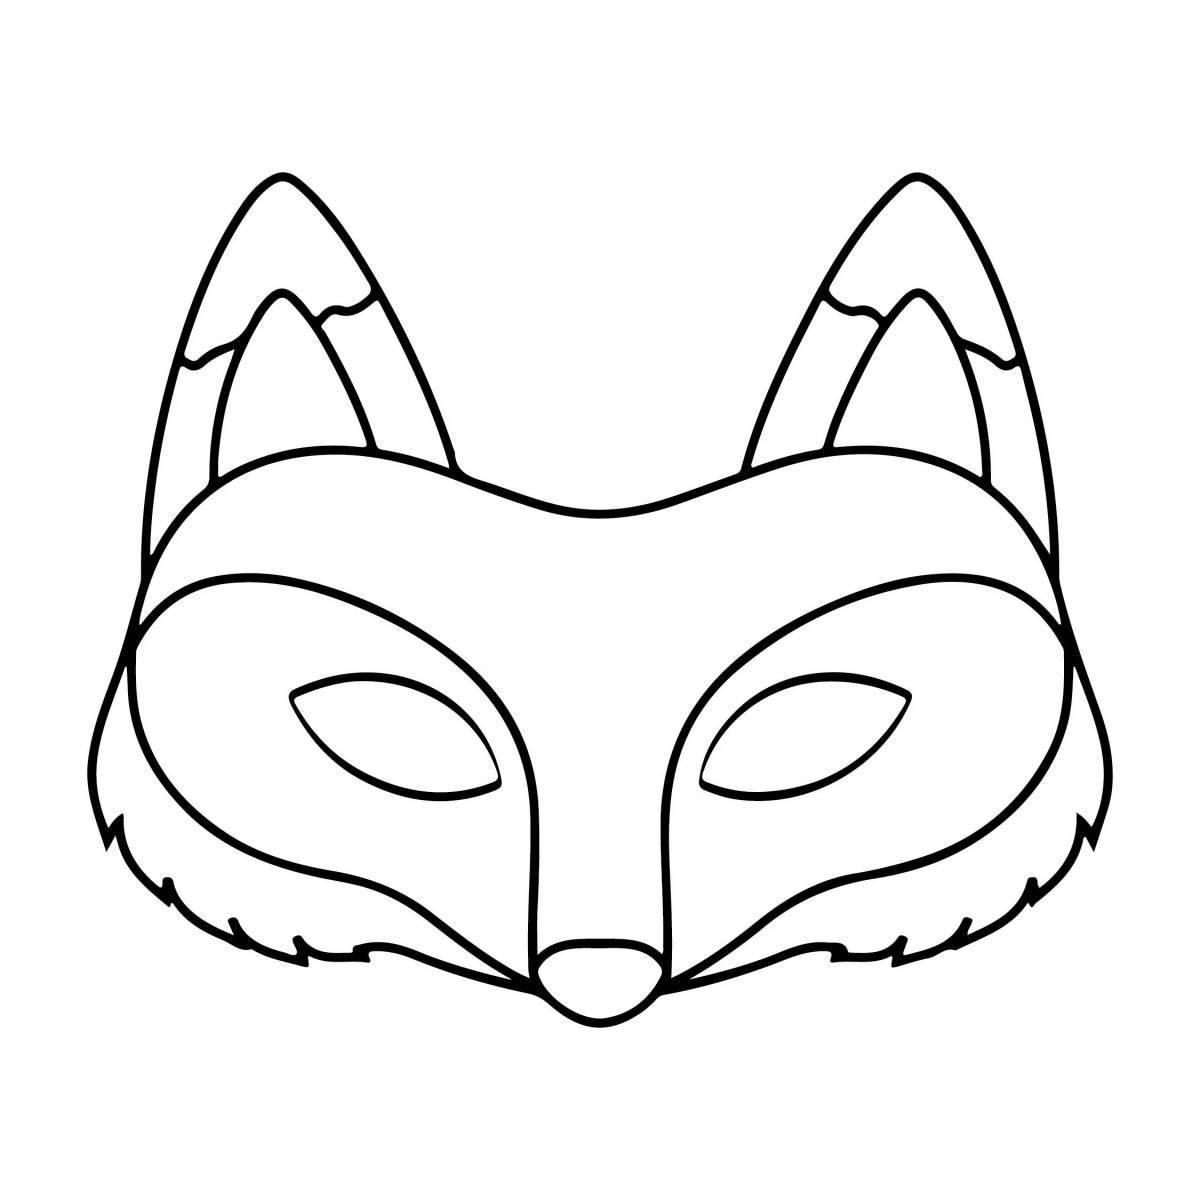 Exciting fox mask coloring book